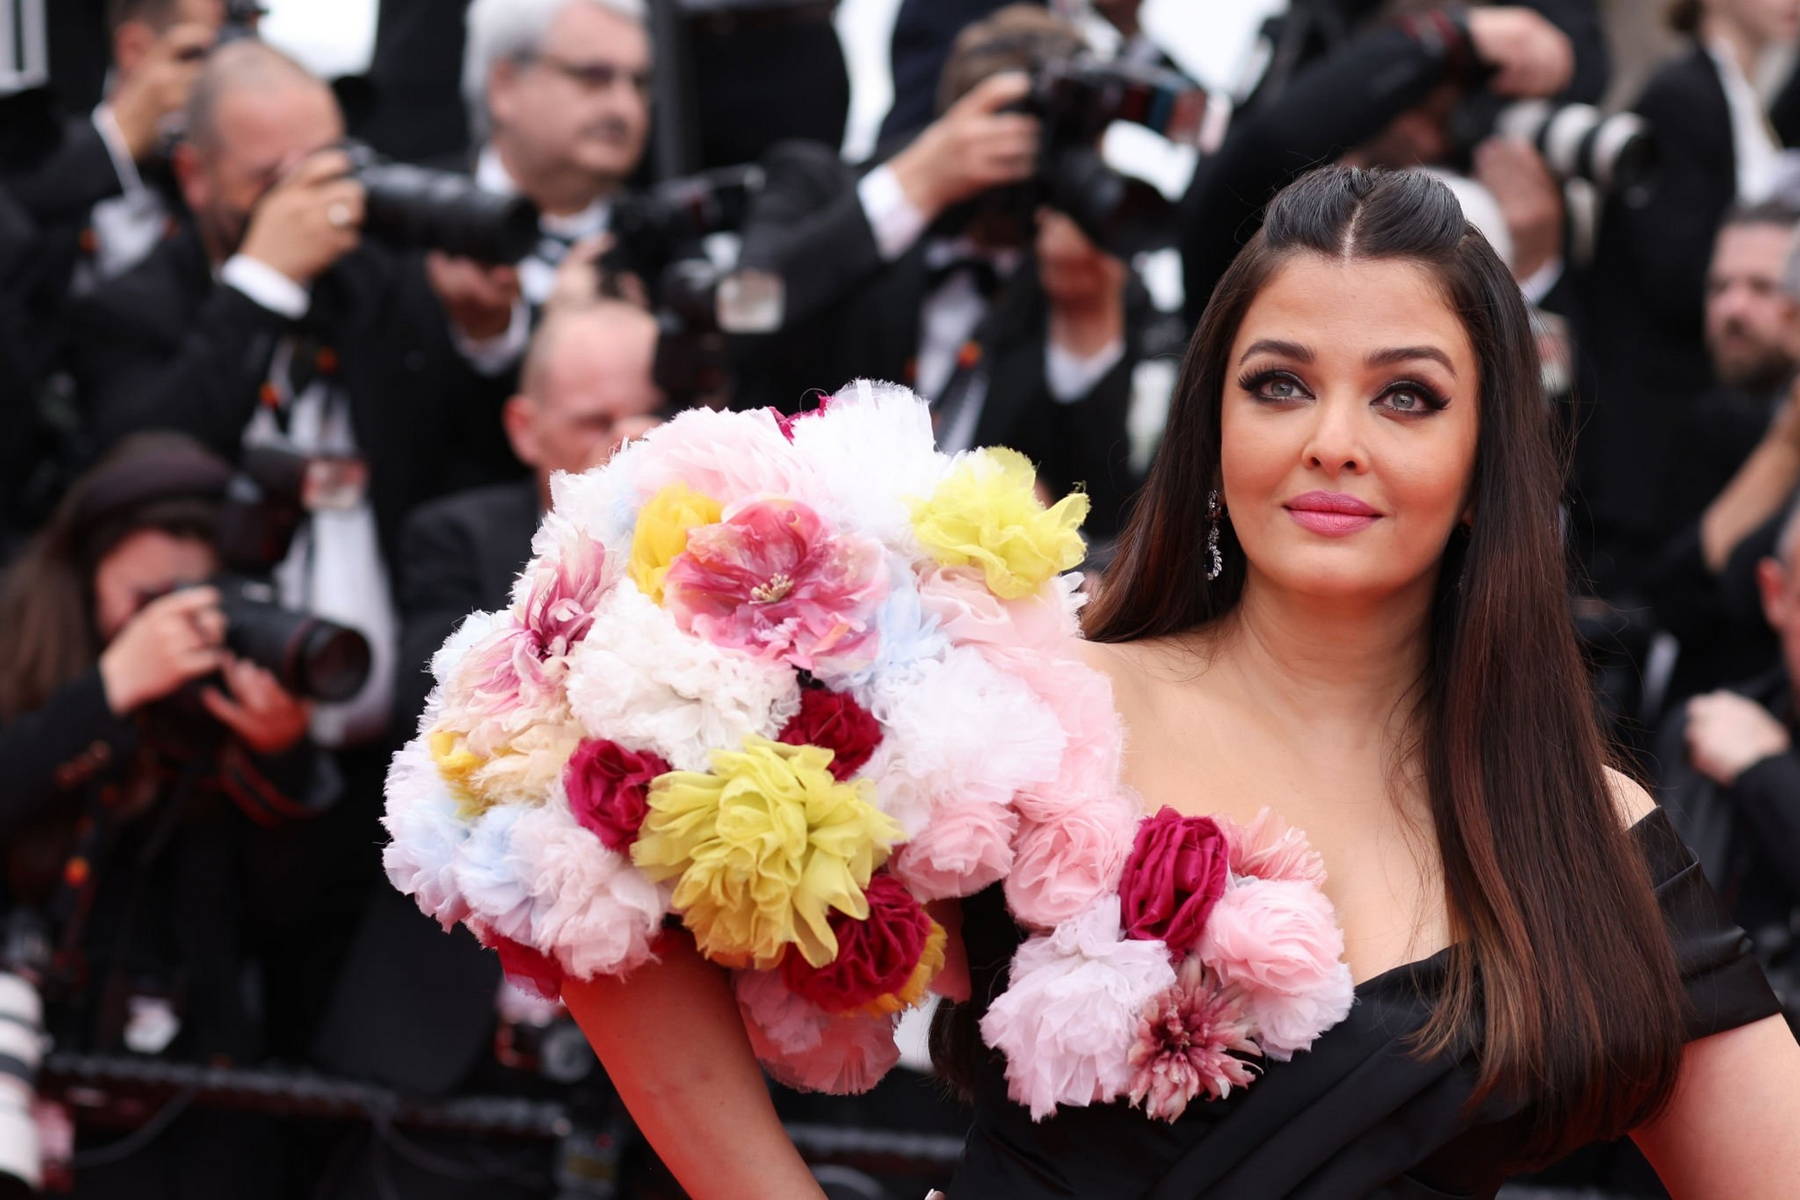 aishwarya rai bachchan attends the screening of 'top gun- maverick' during  the 75th cannes film festival in cannes, france-180522_13